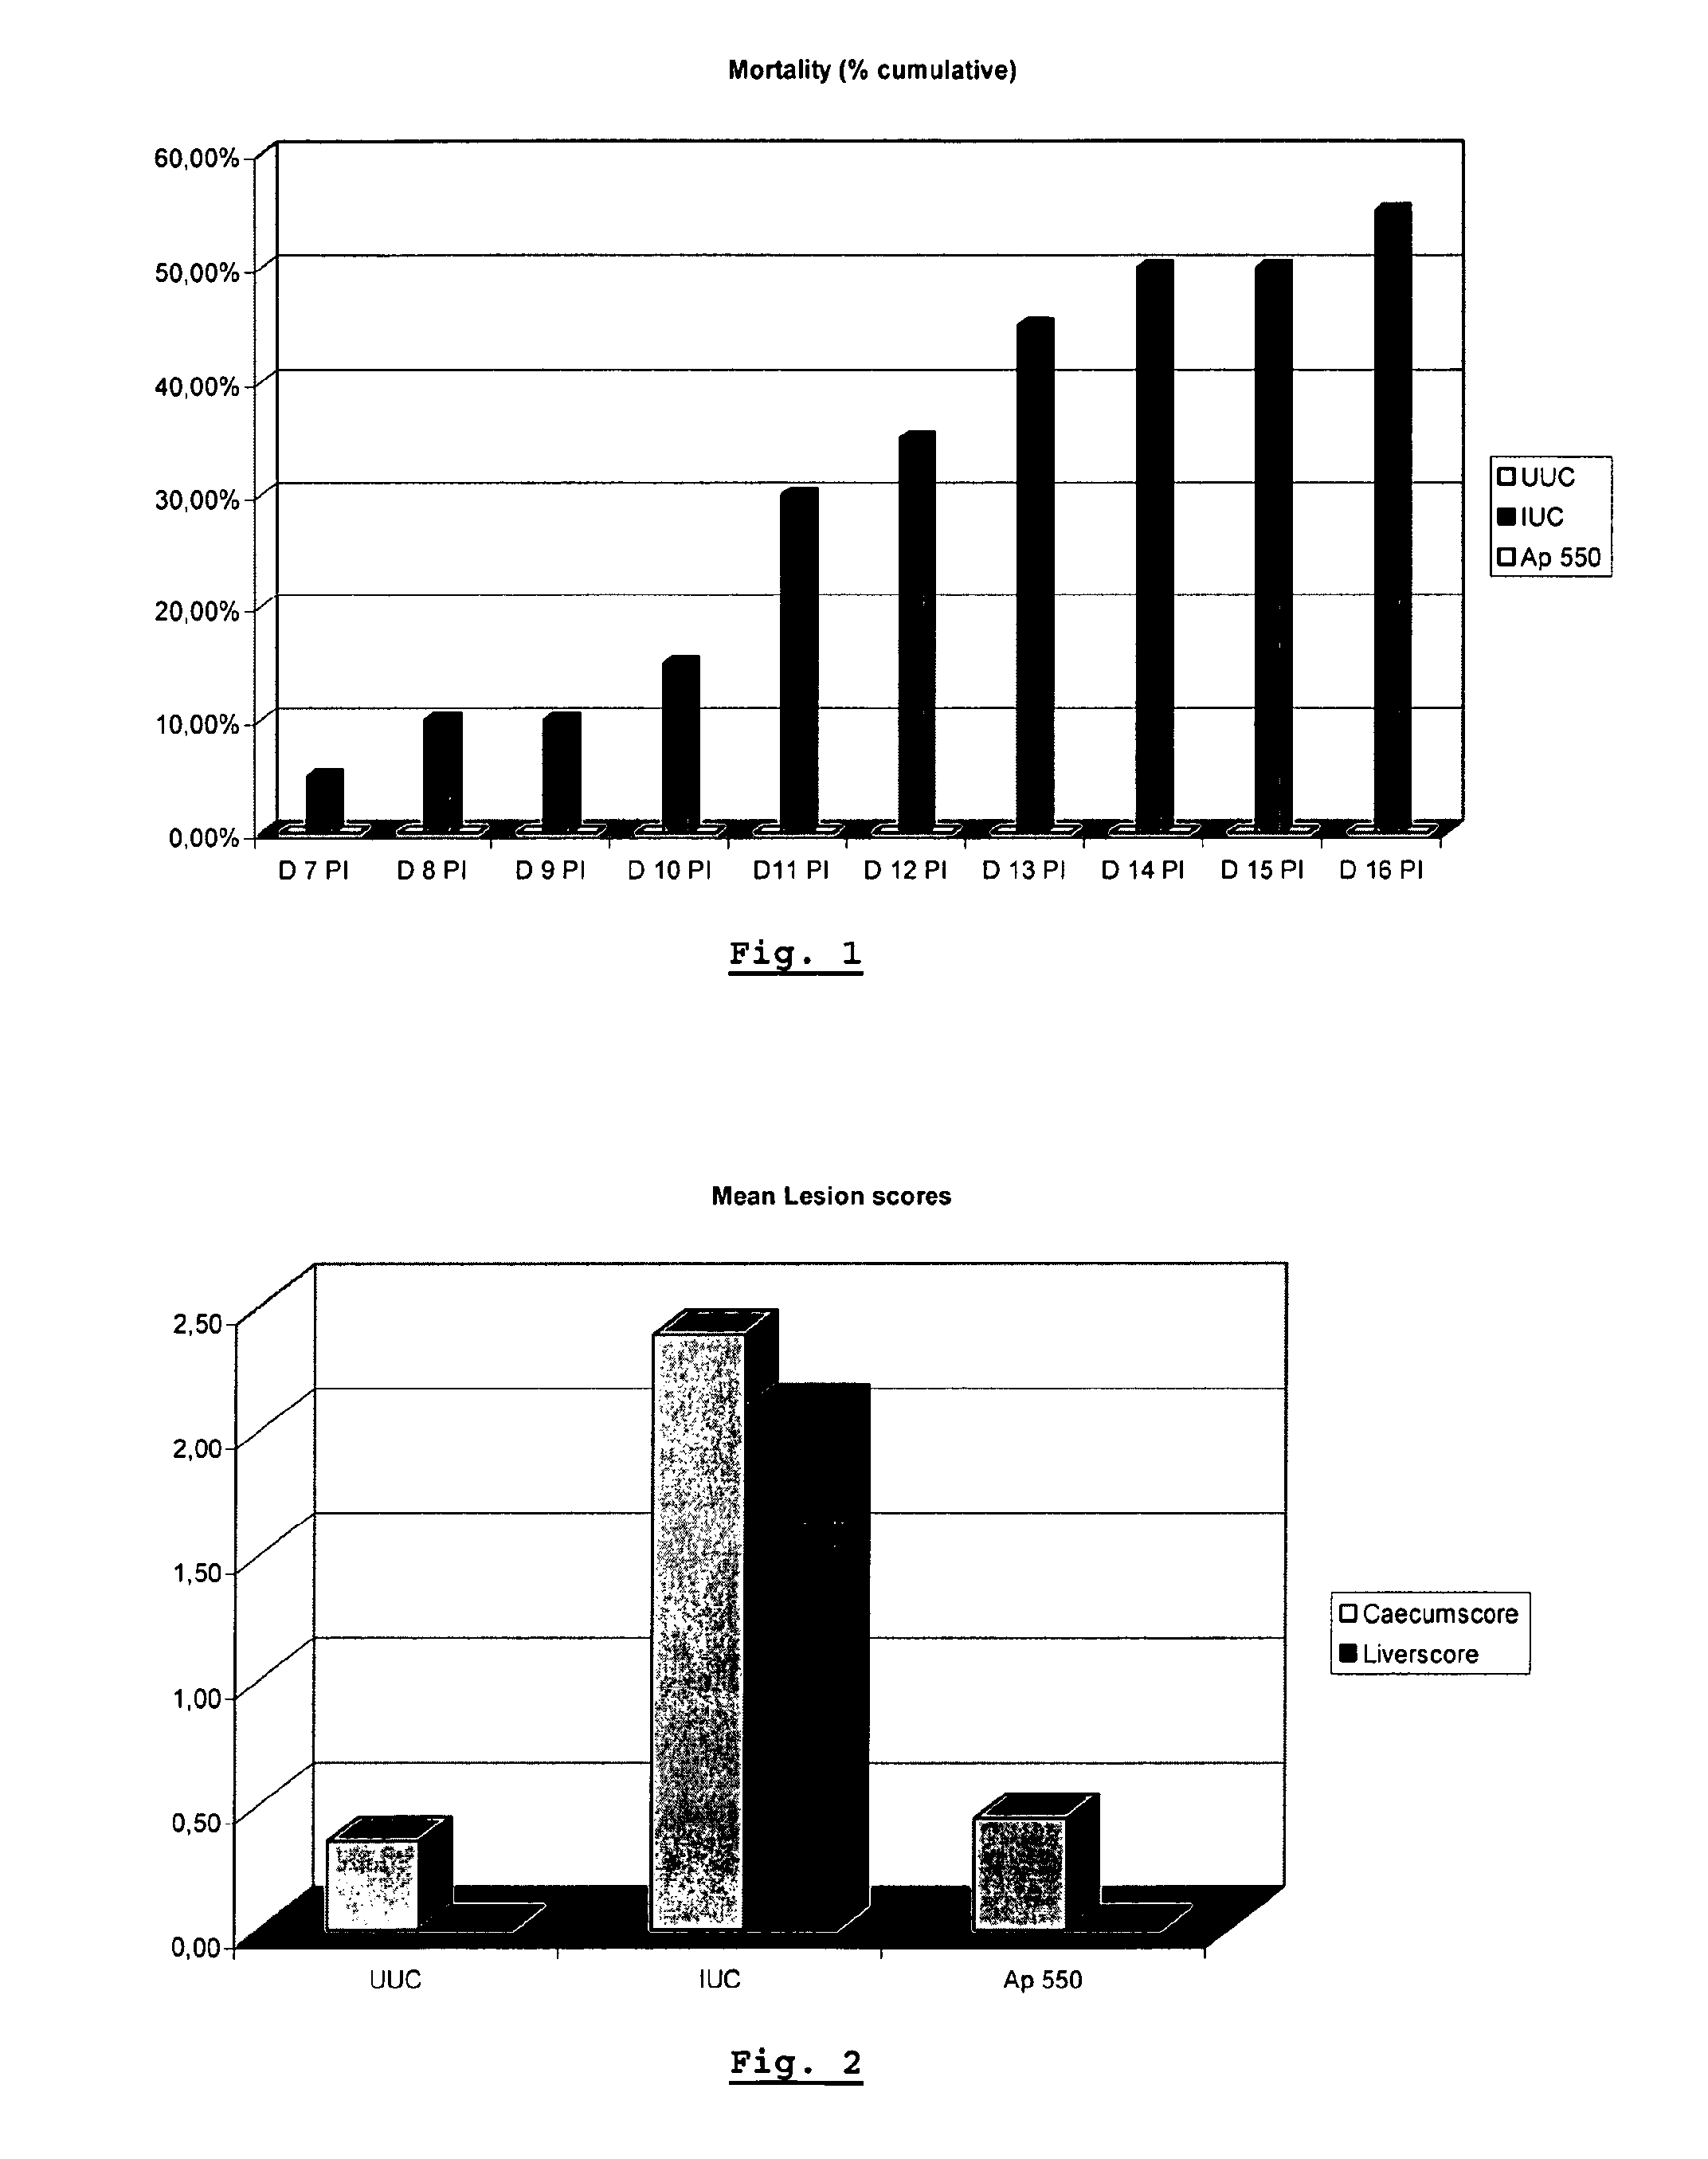 Feed or pharmaceutical composition comprising apramycin or an adequate salt thereof